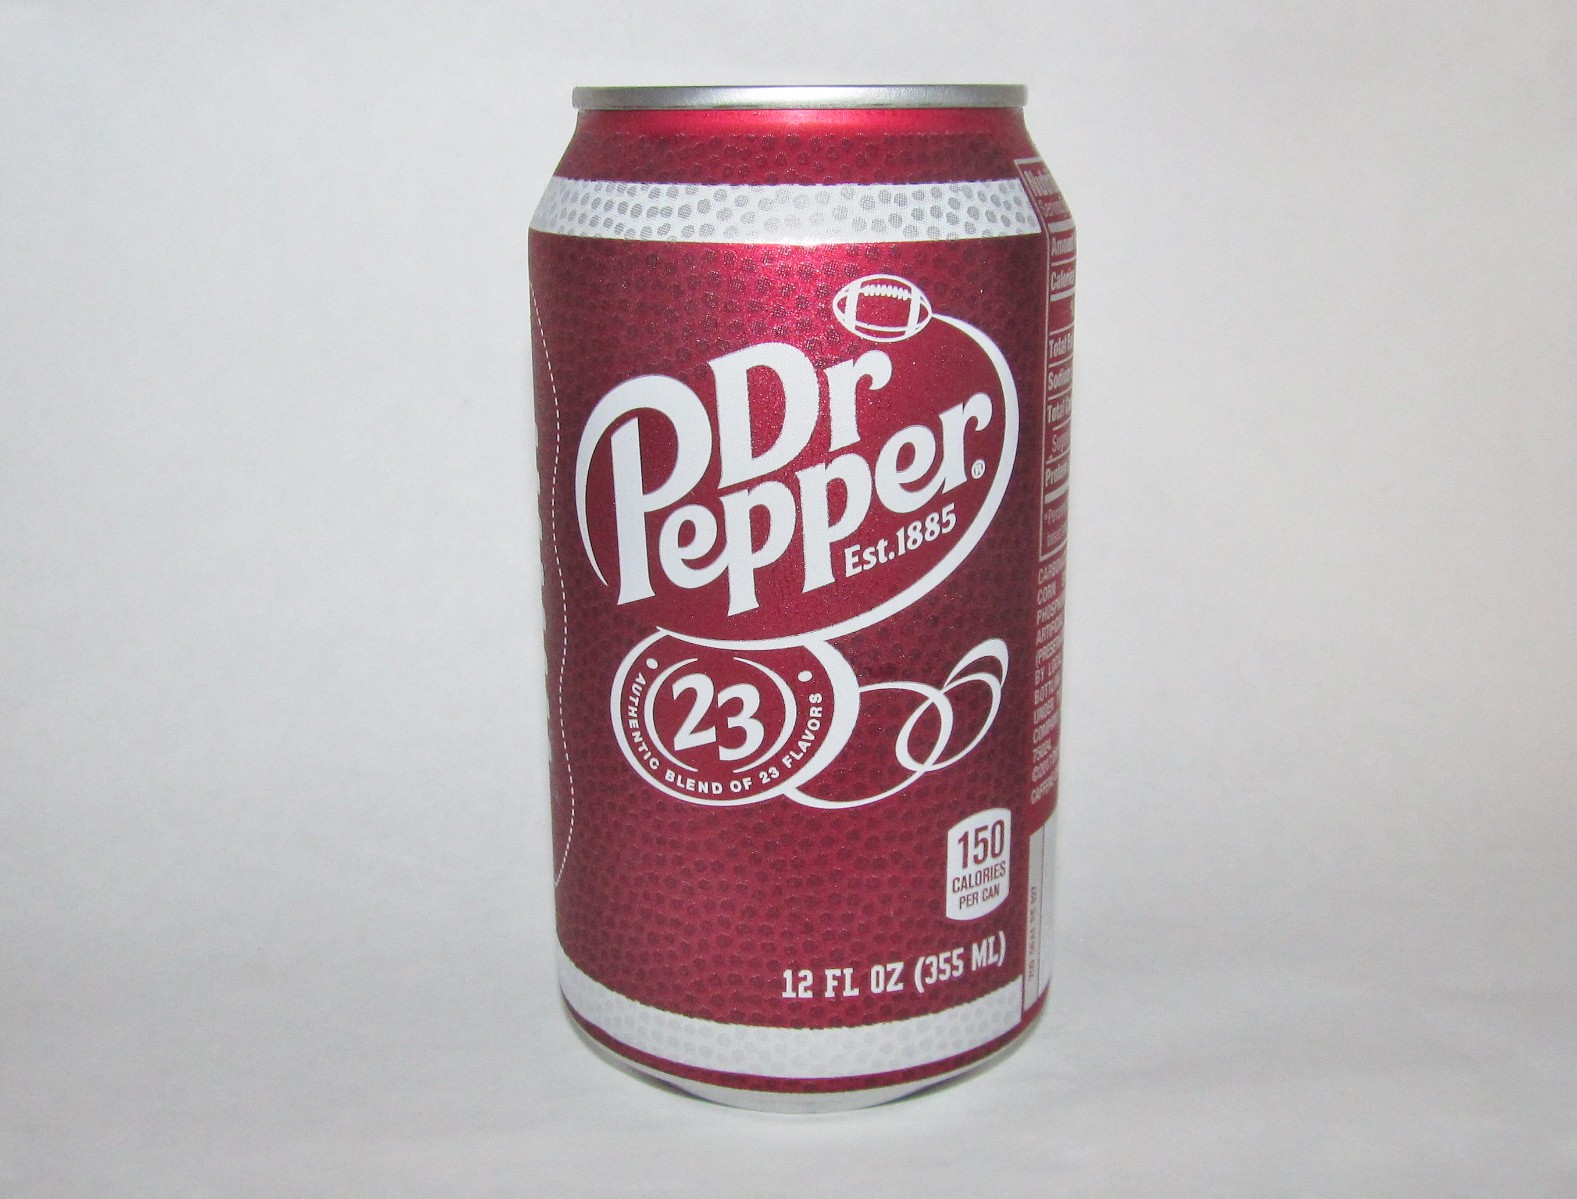 The healthy benefit of Dr Pepper 23